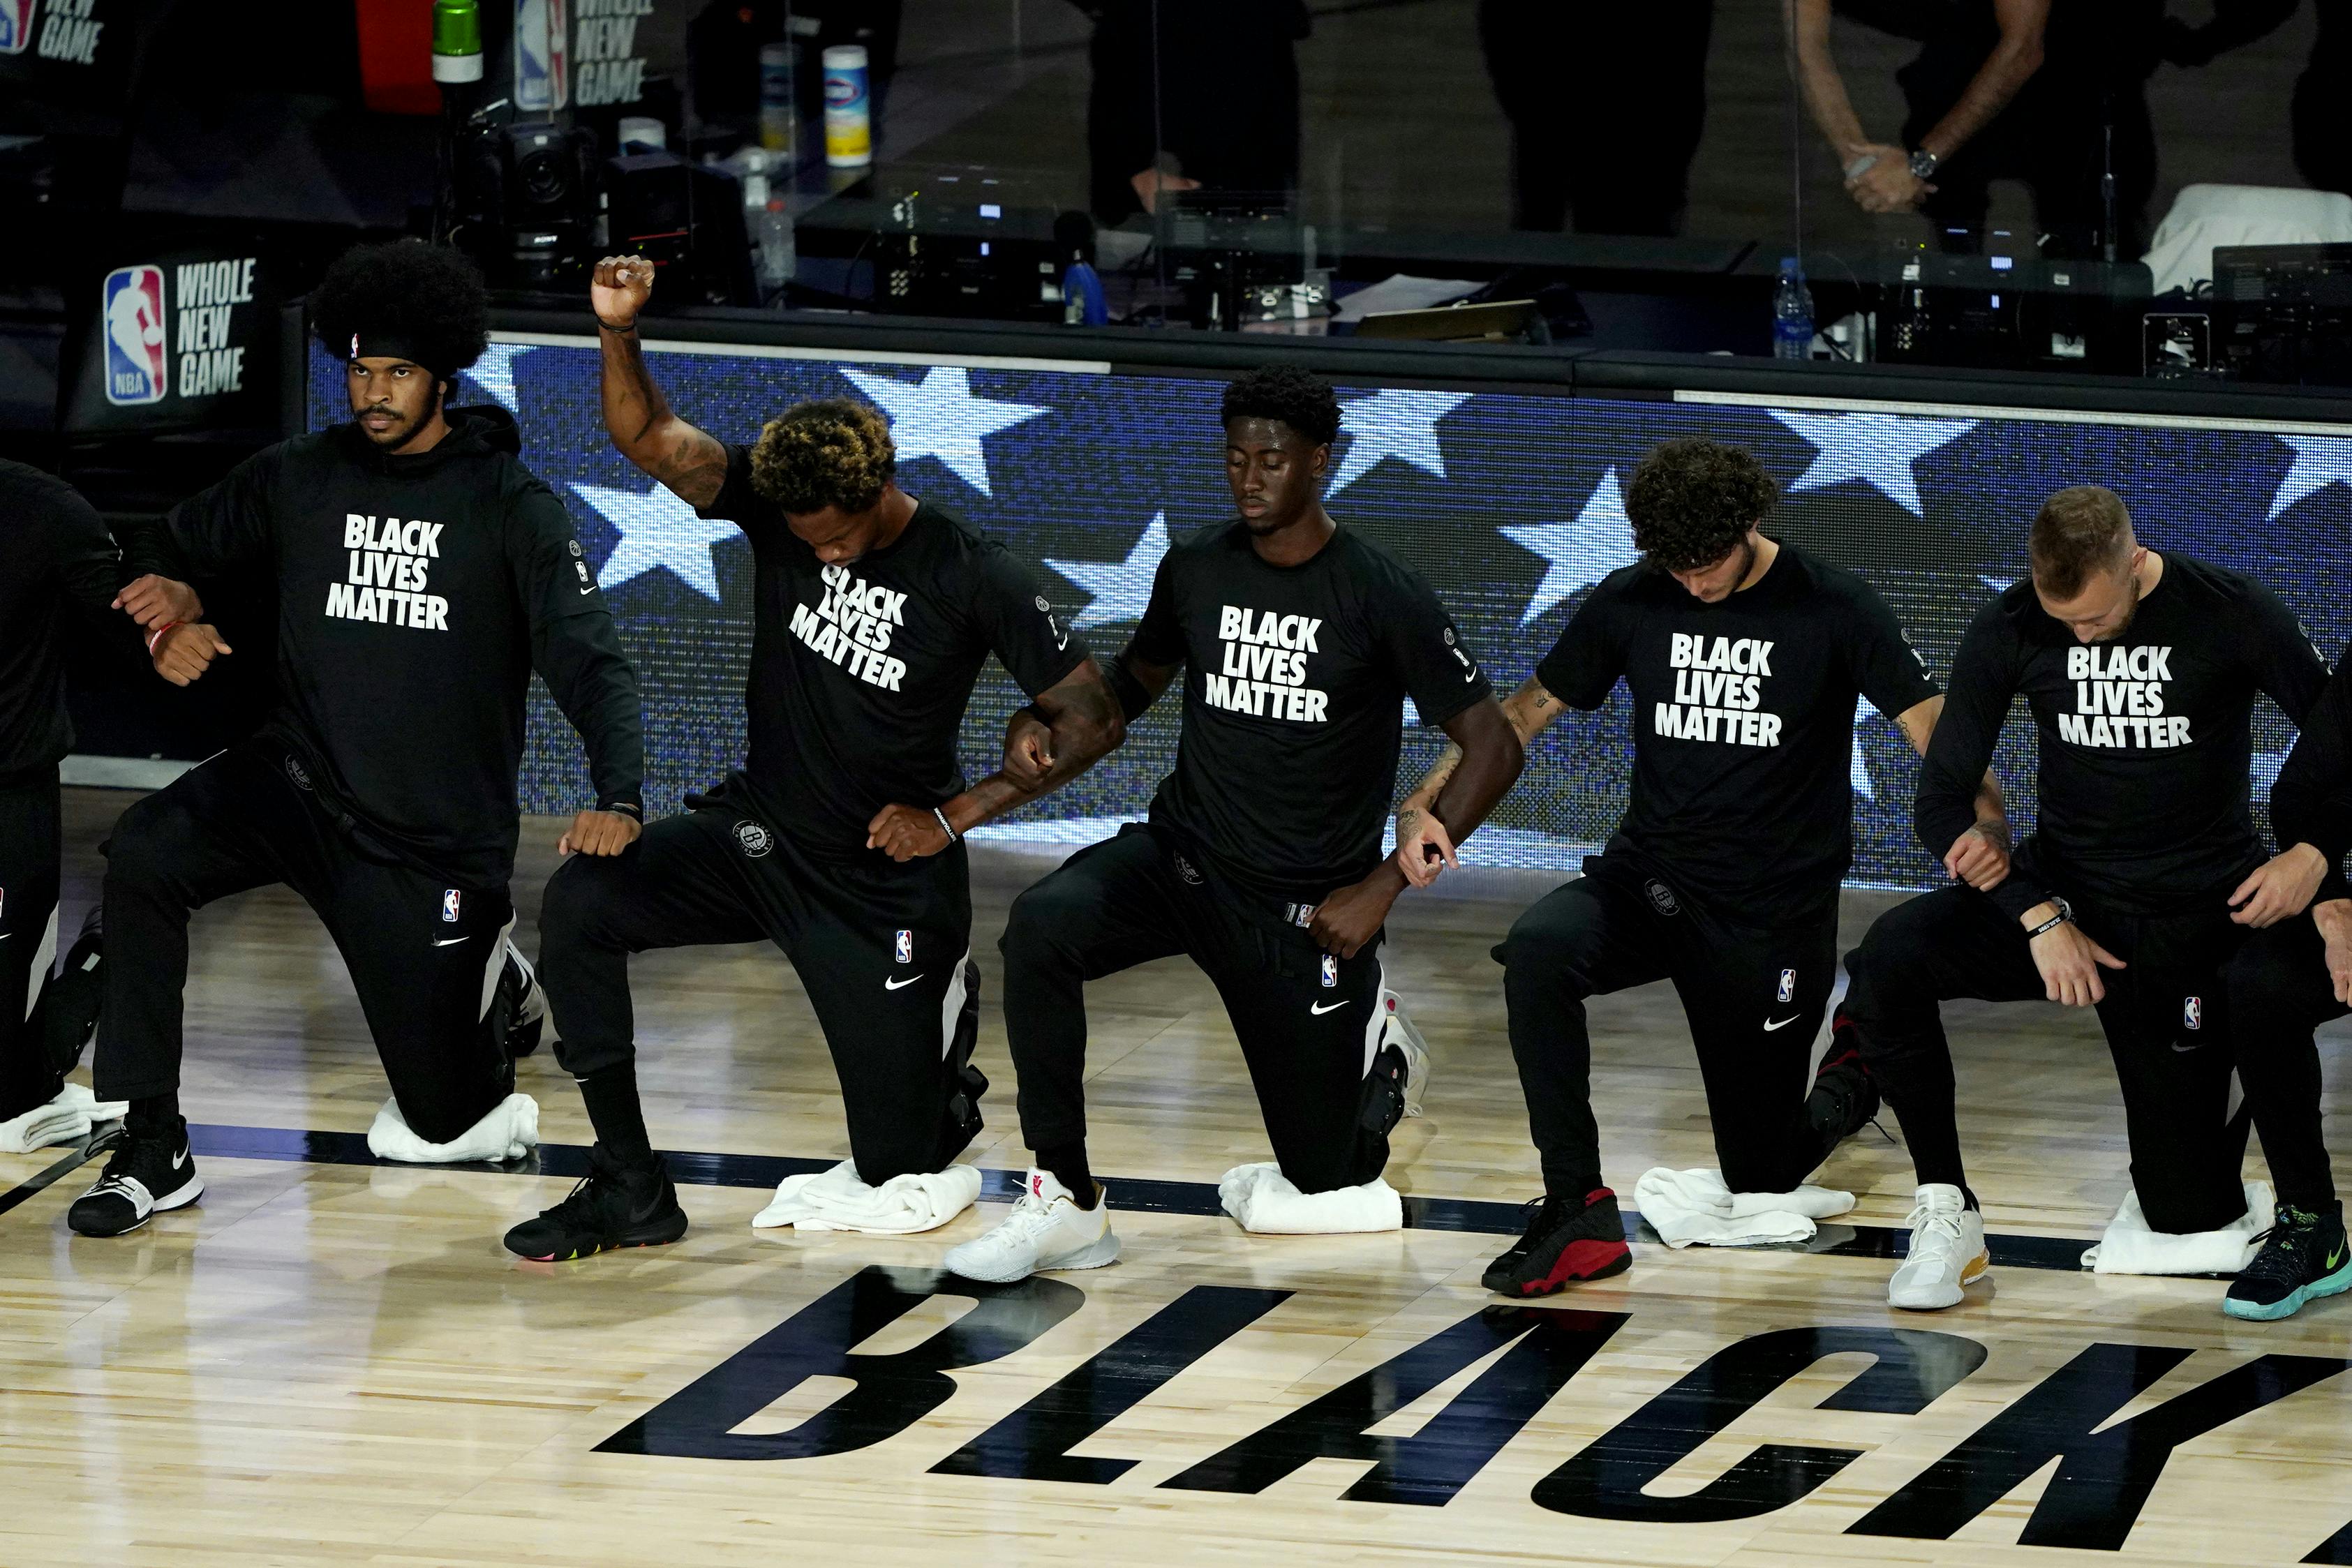 The NBA Is White Conservatives Favorite New Target for Racial Dog-Whistling The New Republic